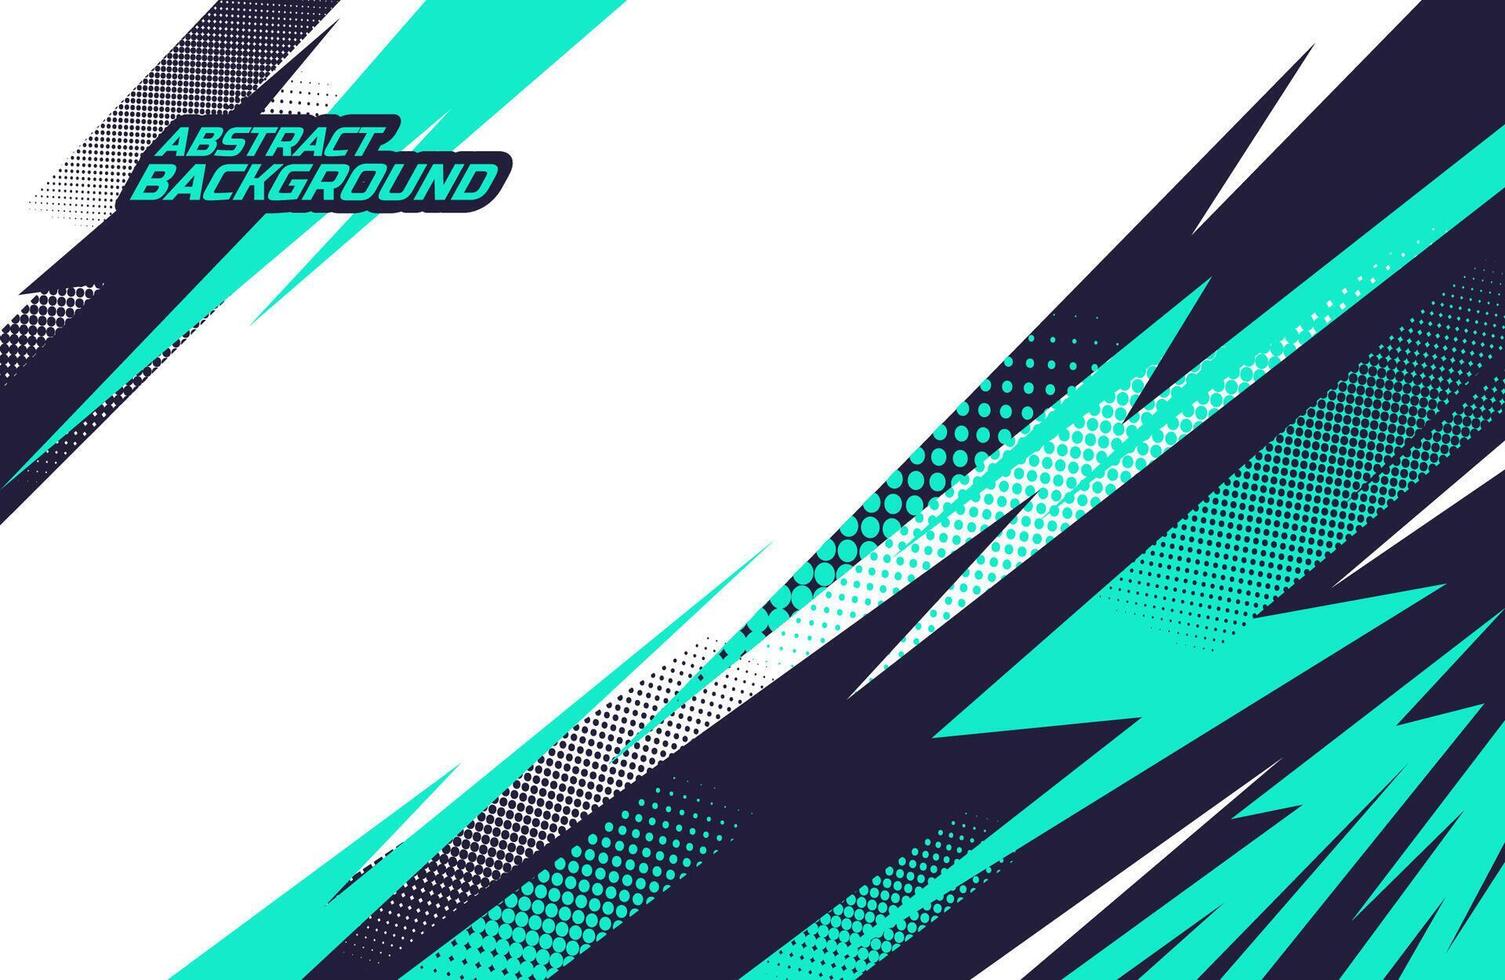 abstract thunder shape background design for racing decal vector